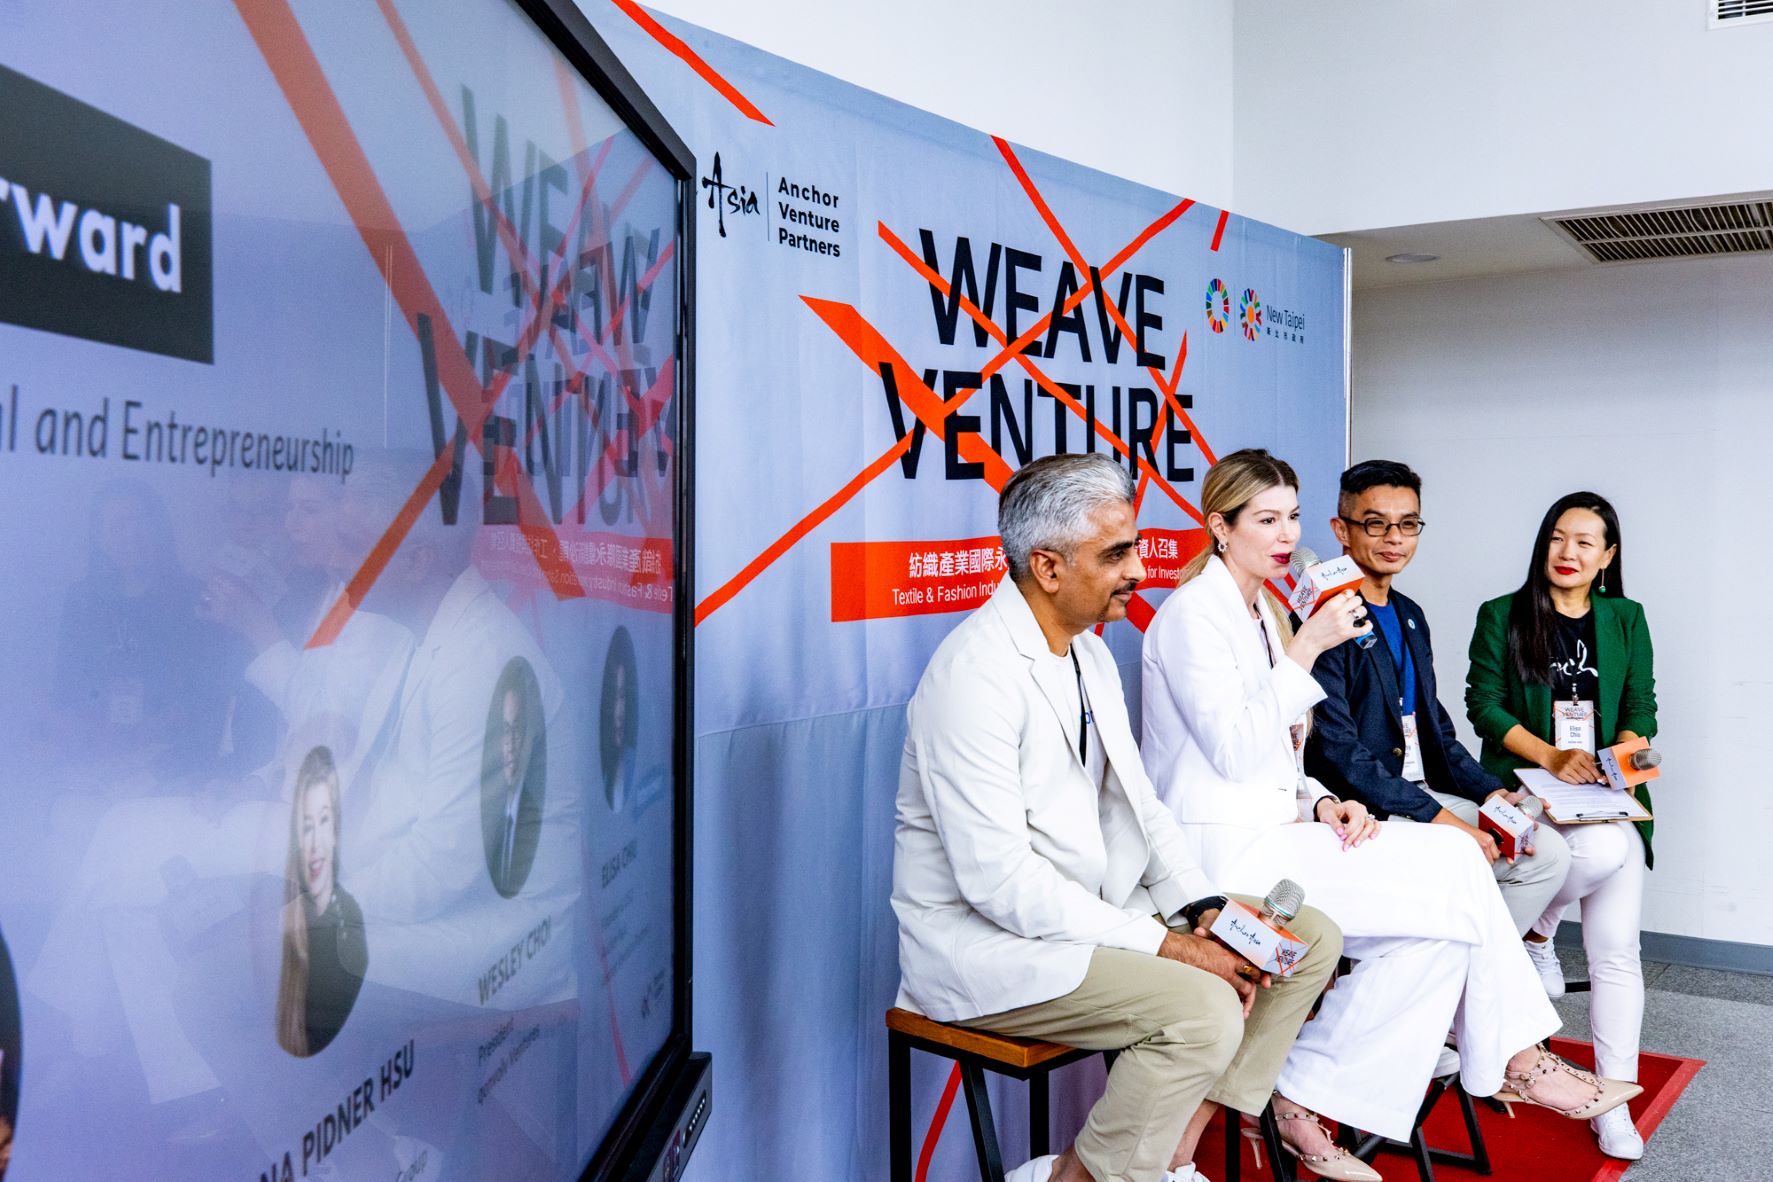 ▲ Pictured from left to right: Gulshan Kumar, General Manager of lululemon Taiwan; Juliana Pidner Hsu, Managing Director of DRIVE Catalyst, Far Eastern Group; Wesley Choi, President of qonvolv Ventures; and Elisa Chiu, CEO of Anchor Asia and curator of Weave Venture, during the corporate innovation venture capital panel discussion. (Image Source: Anchor Asia)